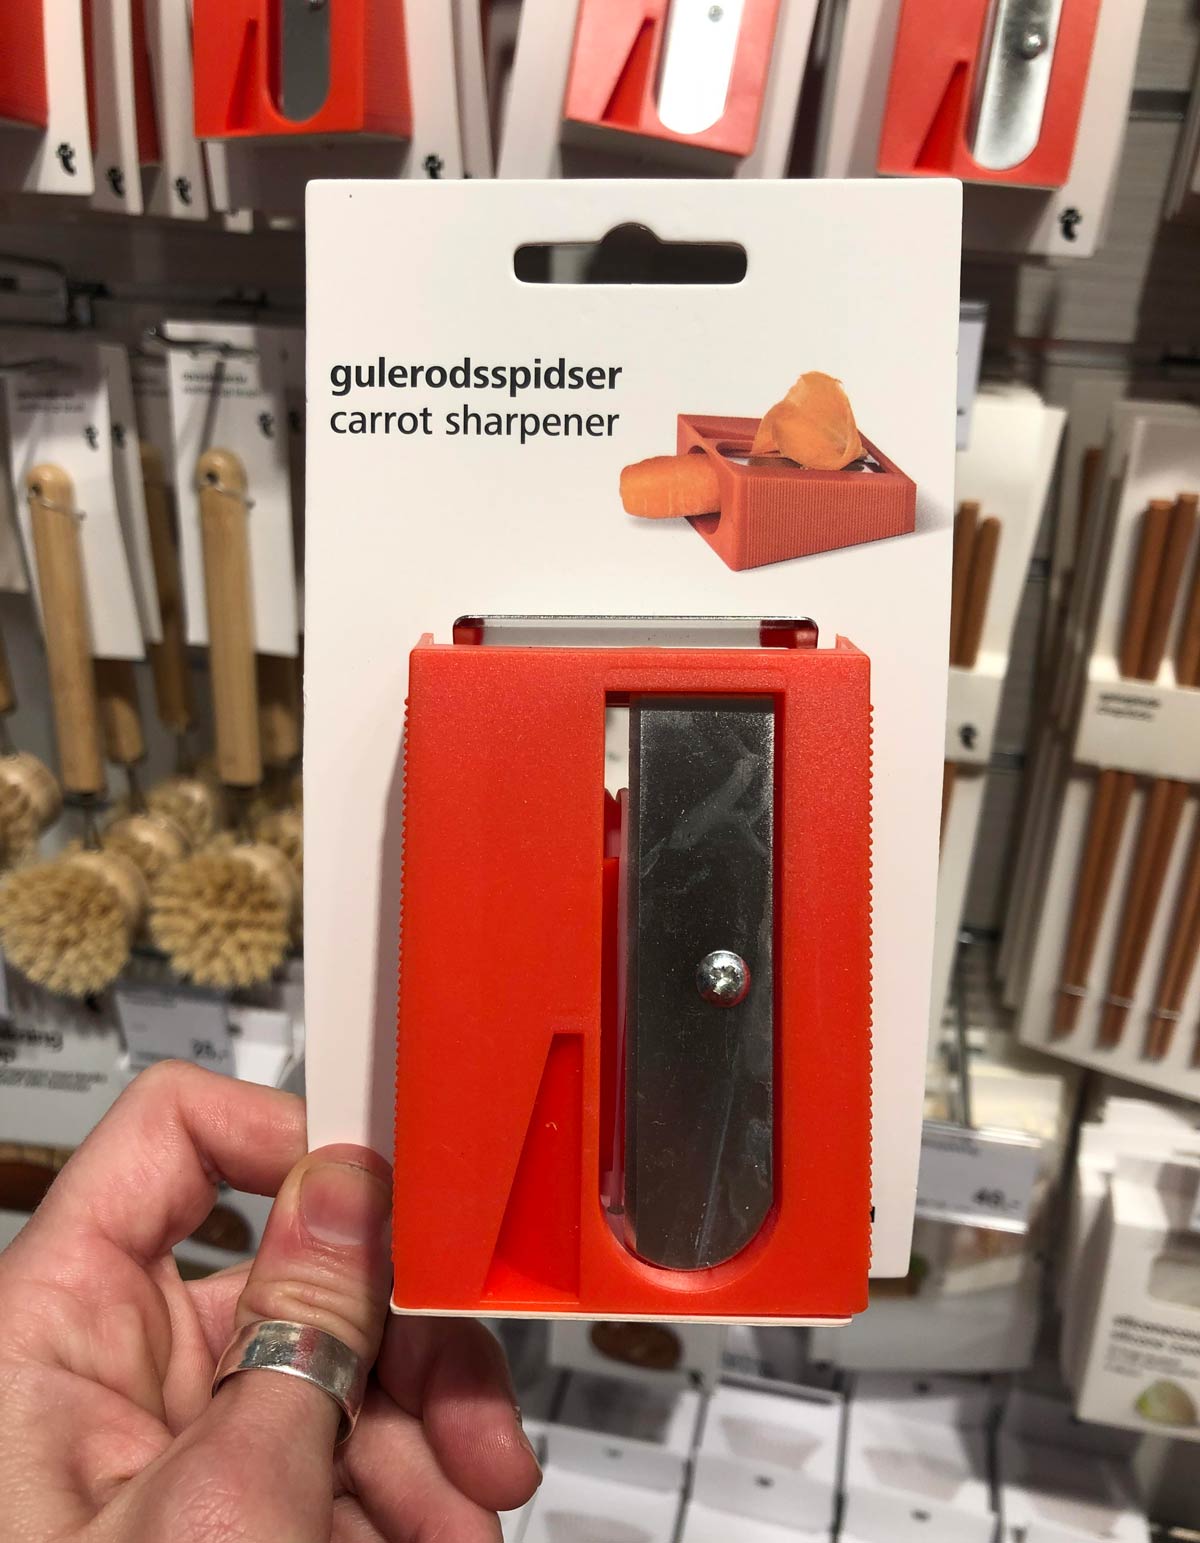 Found this carrot sharpener on my visit to Norway